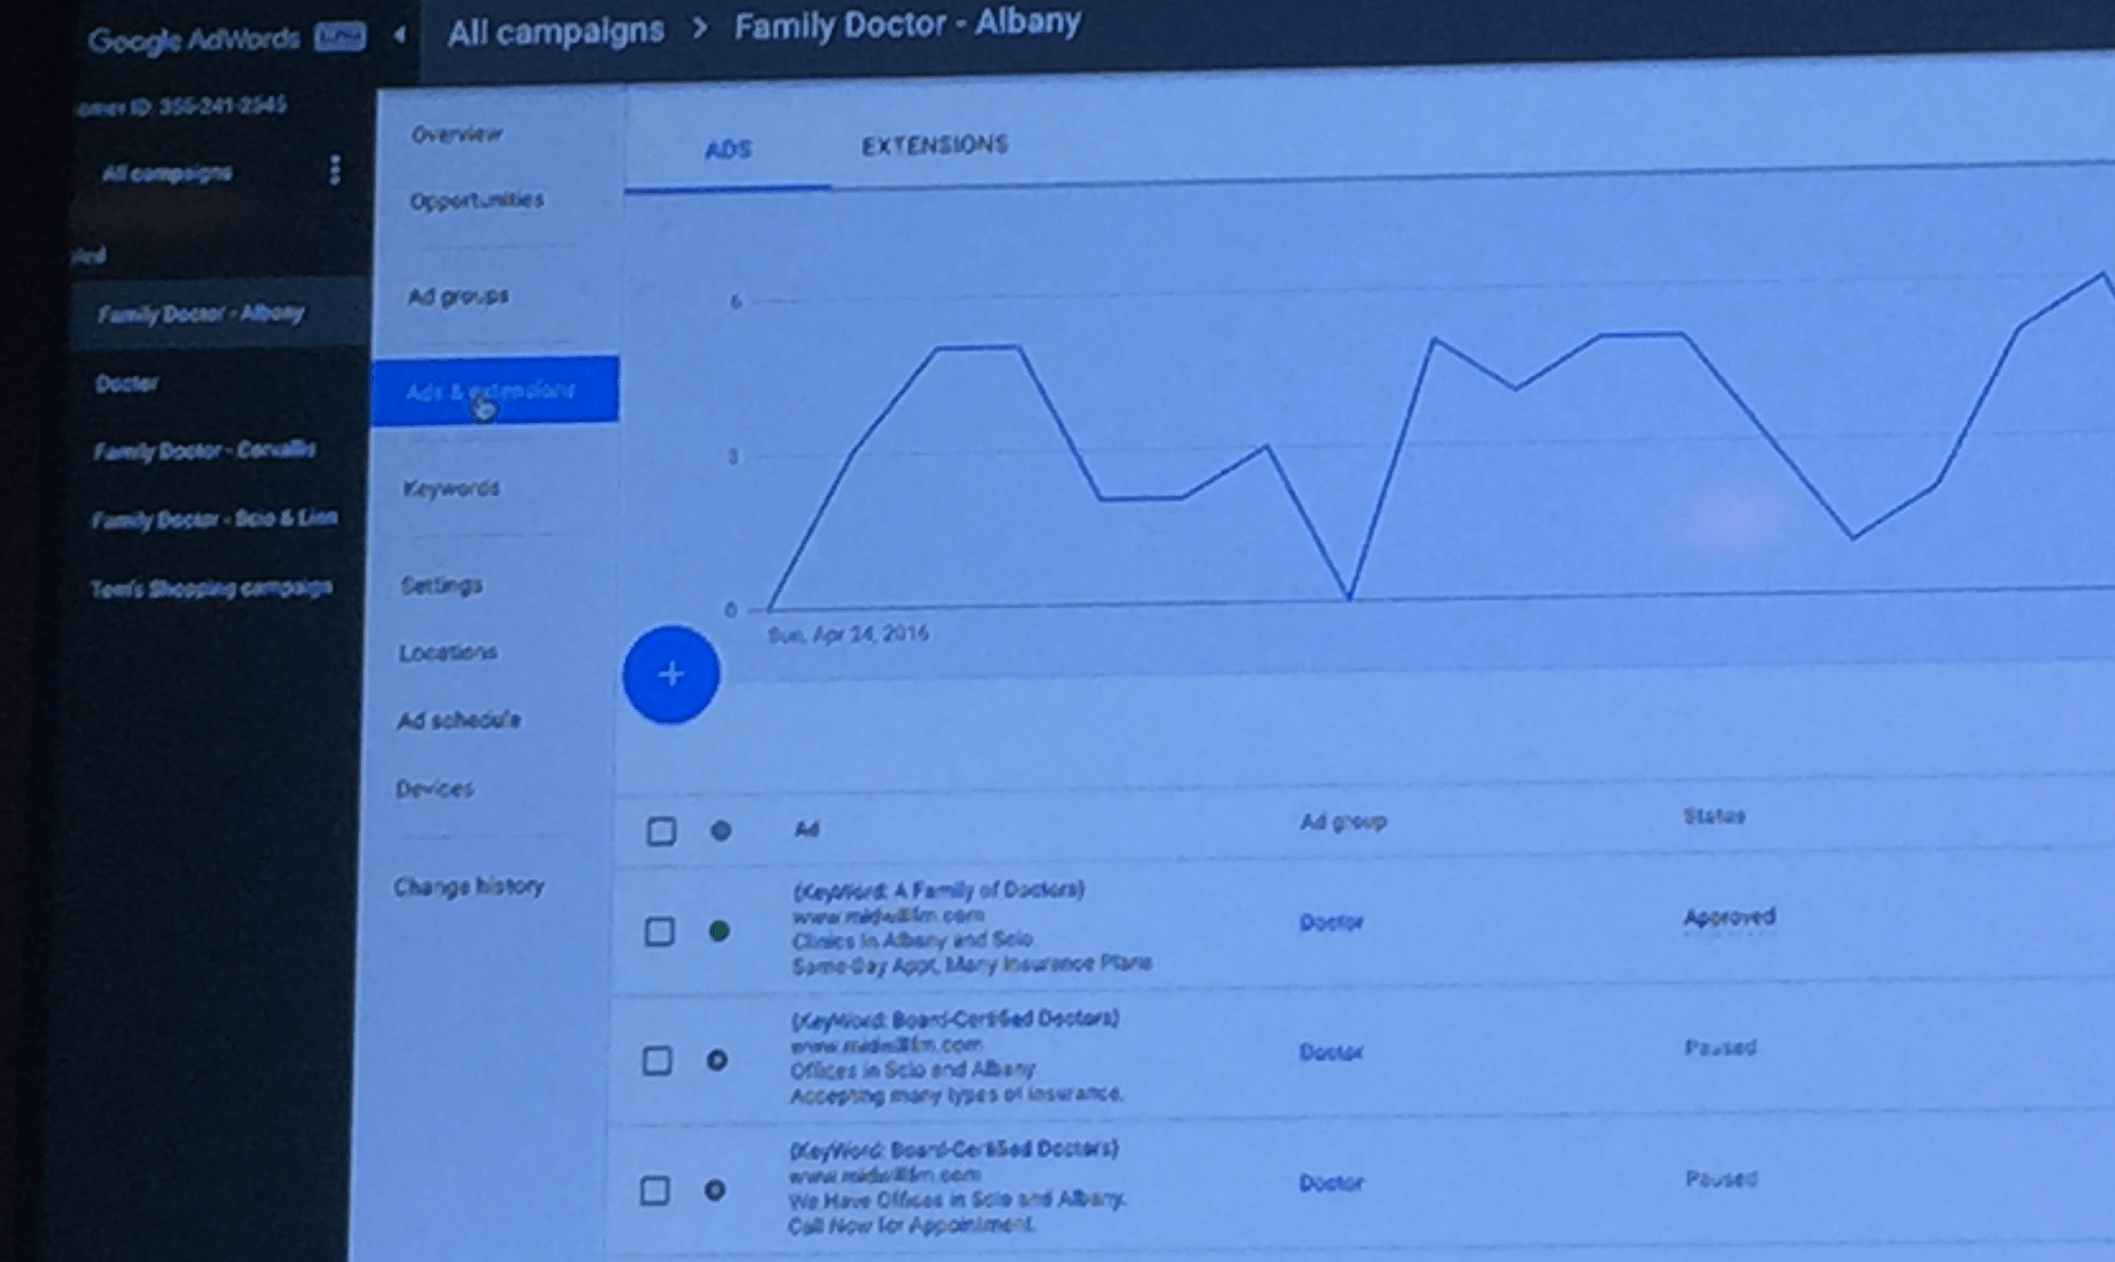 New AdWords interface campaign creation wizard